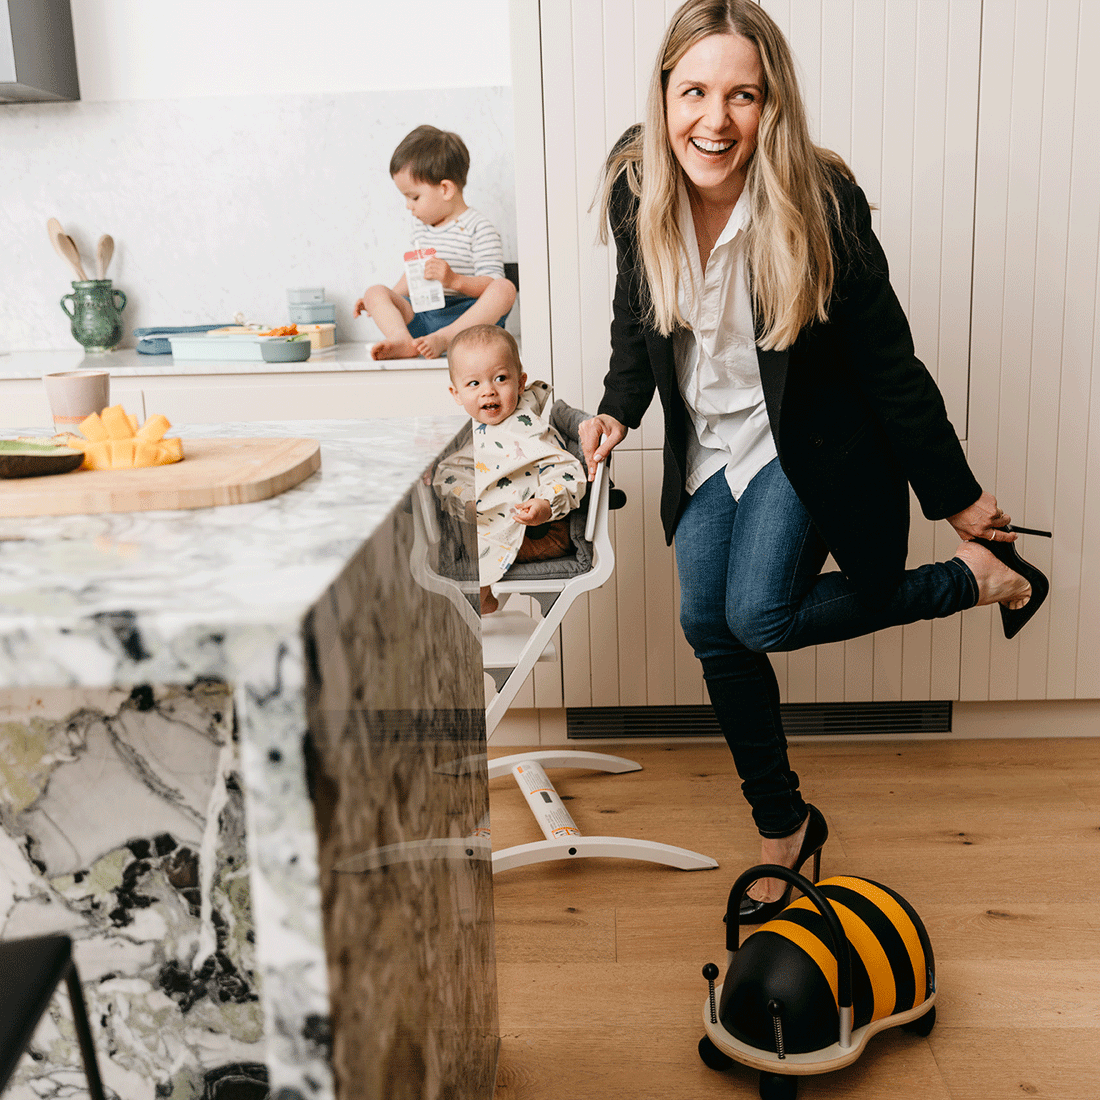 6 Mums on Returning to Paid Work